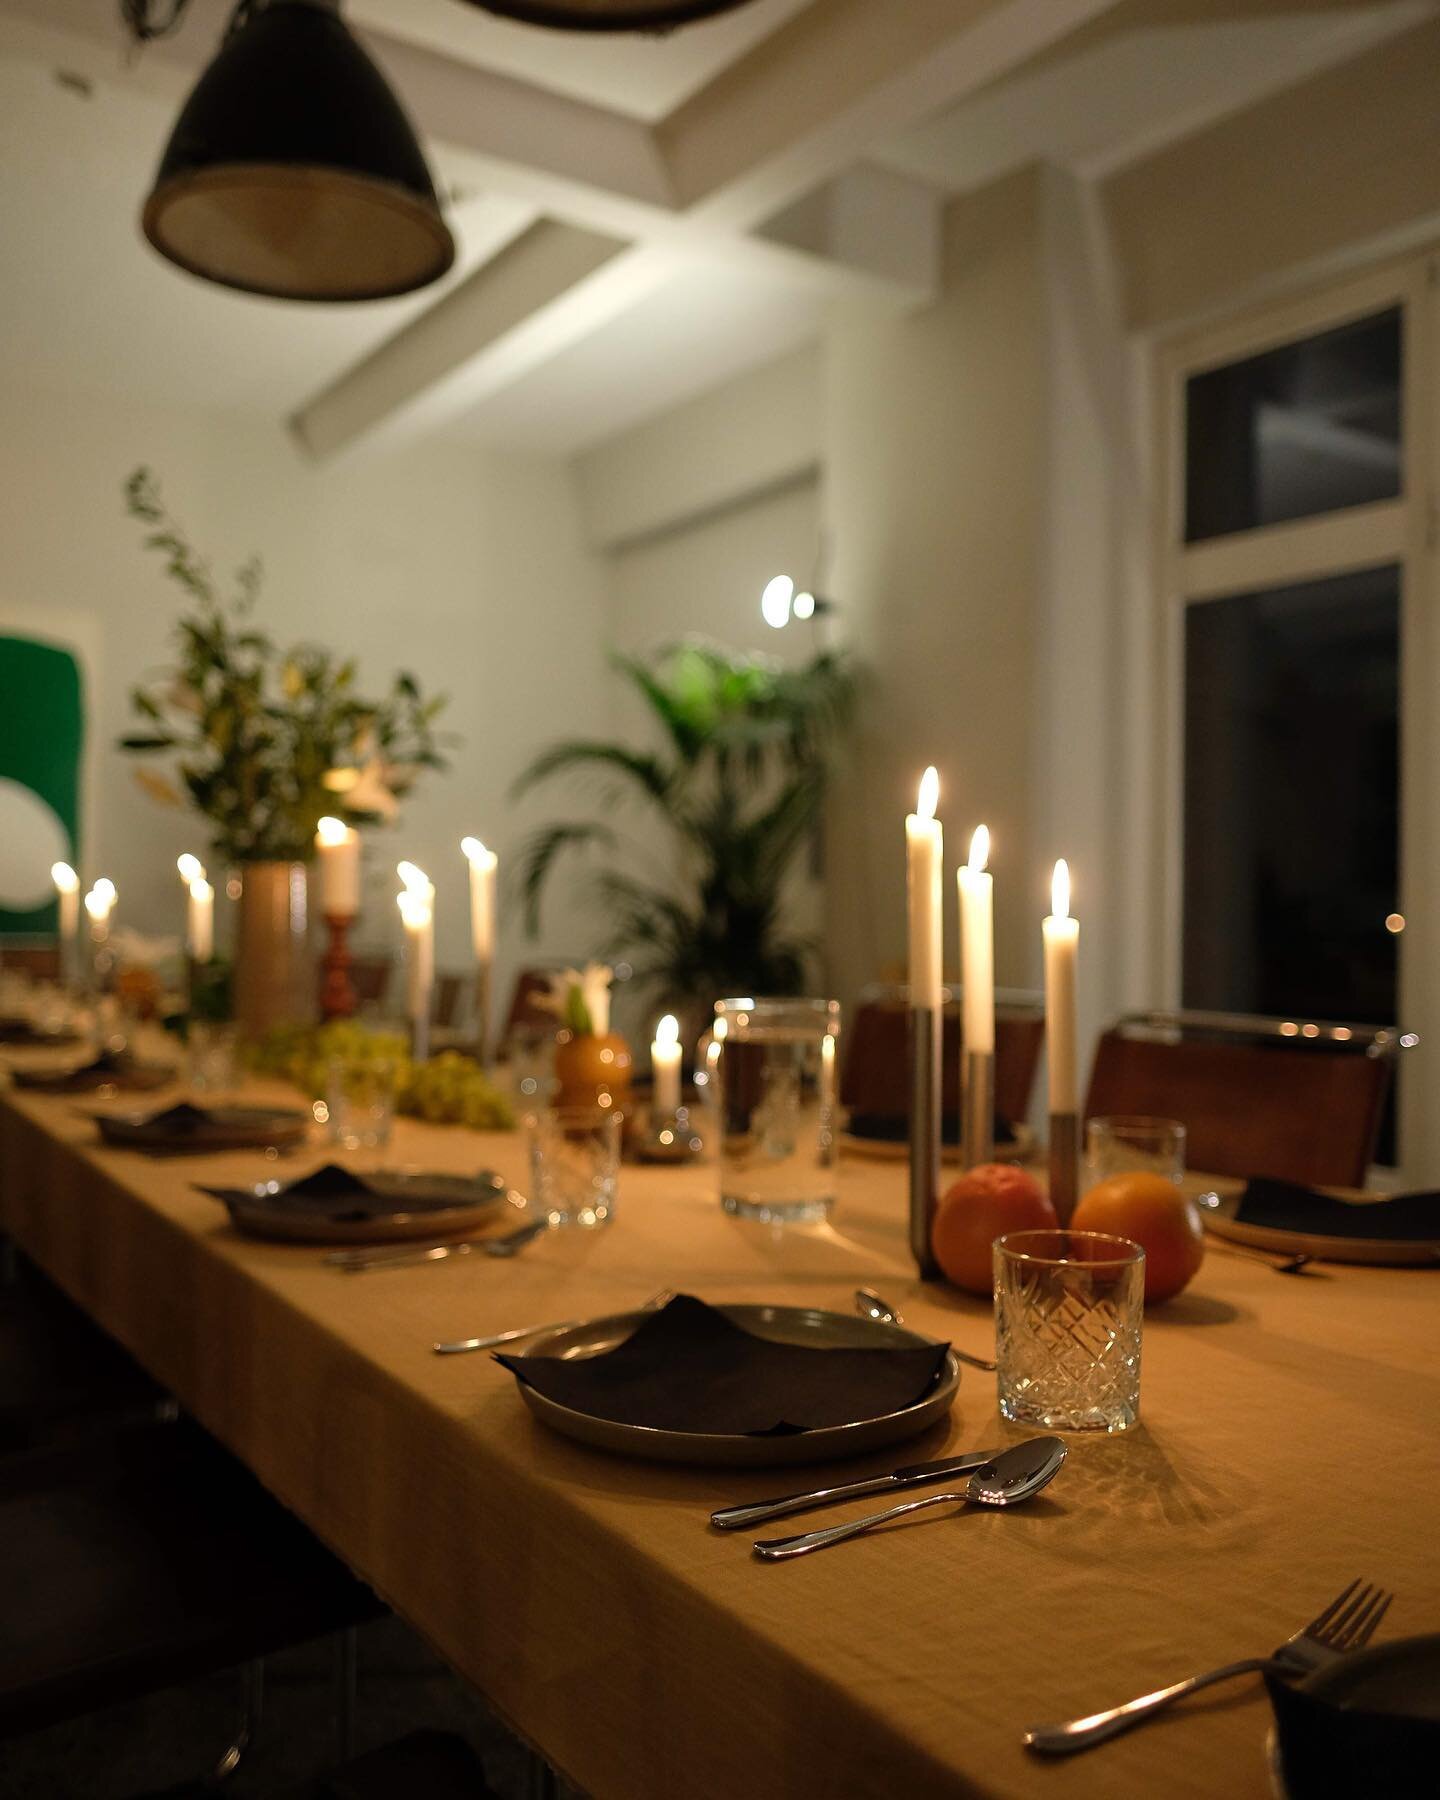 Coming together for a warming dinner in the coziness of our Lo-Fi Loft is the perfect remedy for the cold season ✨

For more info and to book your experience head to our bio.

#lofiloft #cometogether #timeout #comecloser #coziness